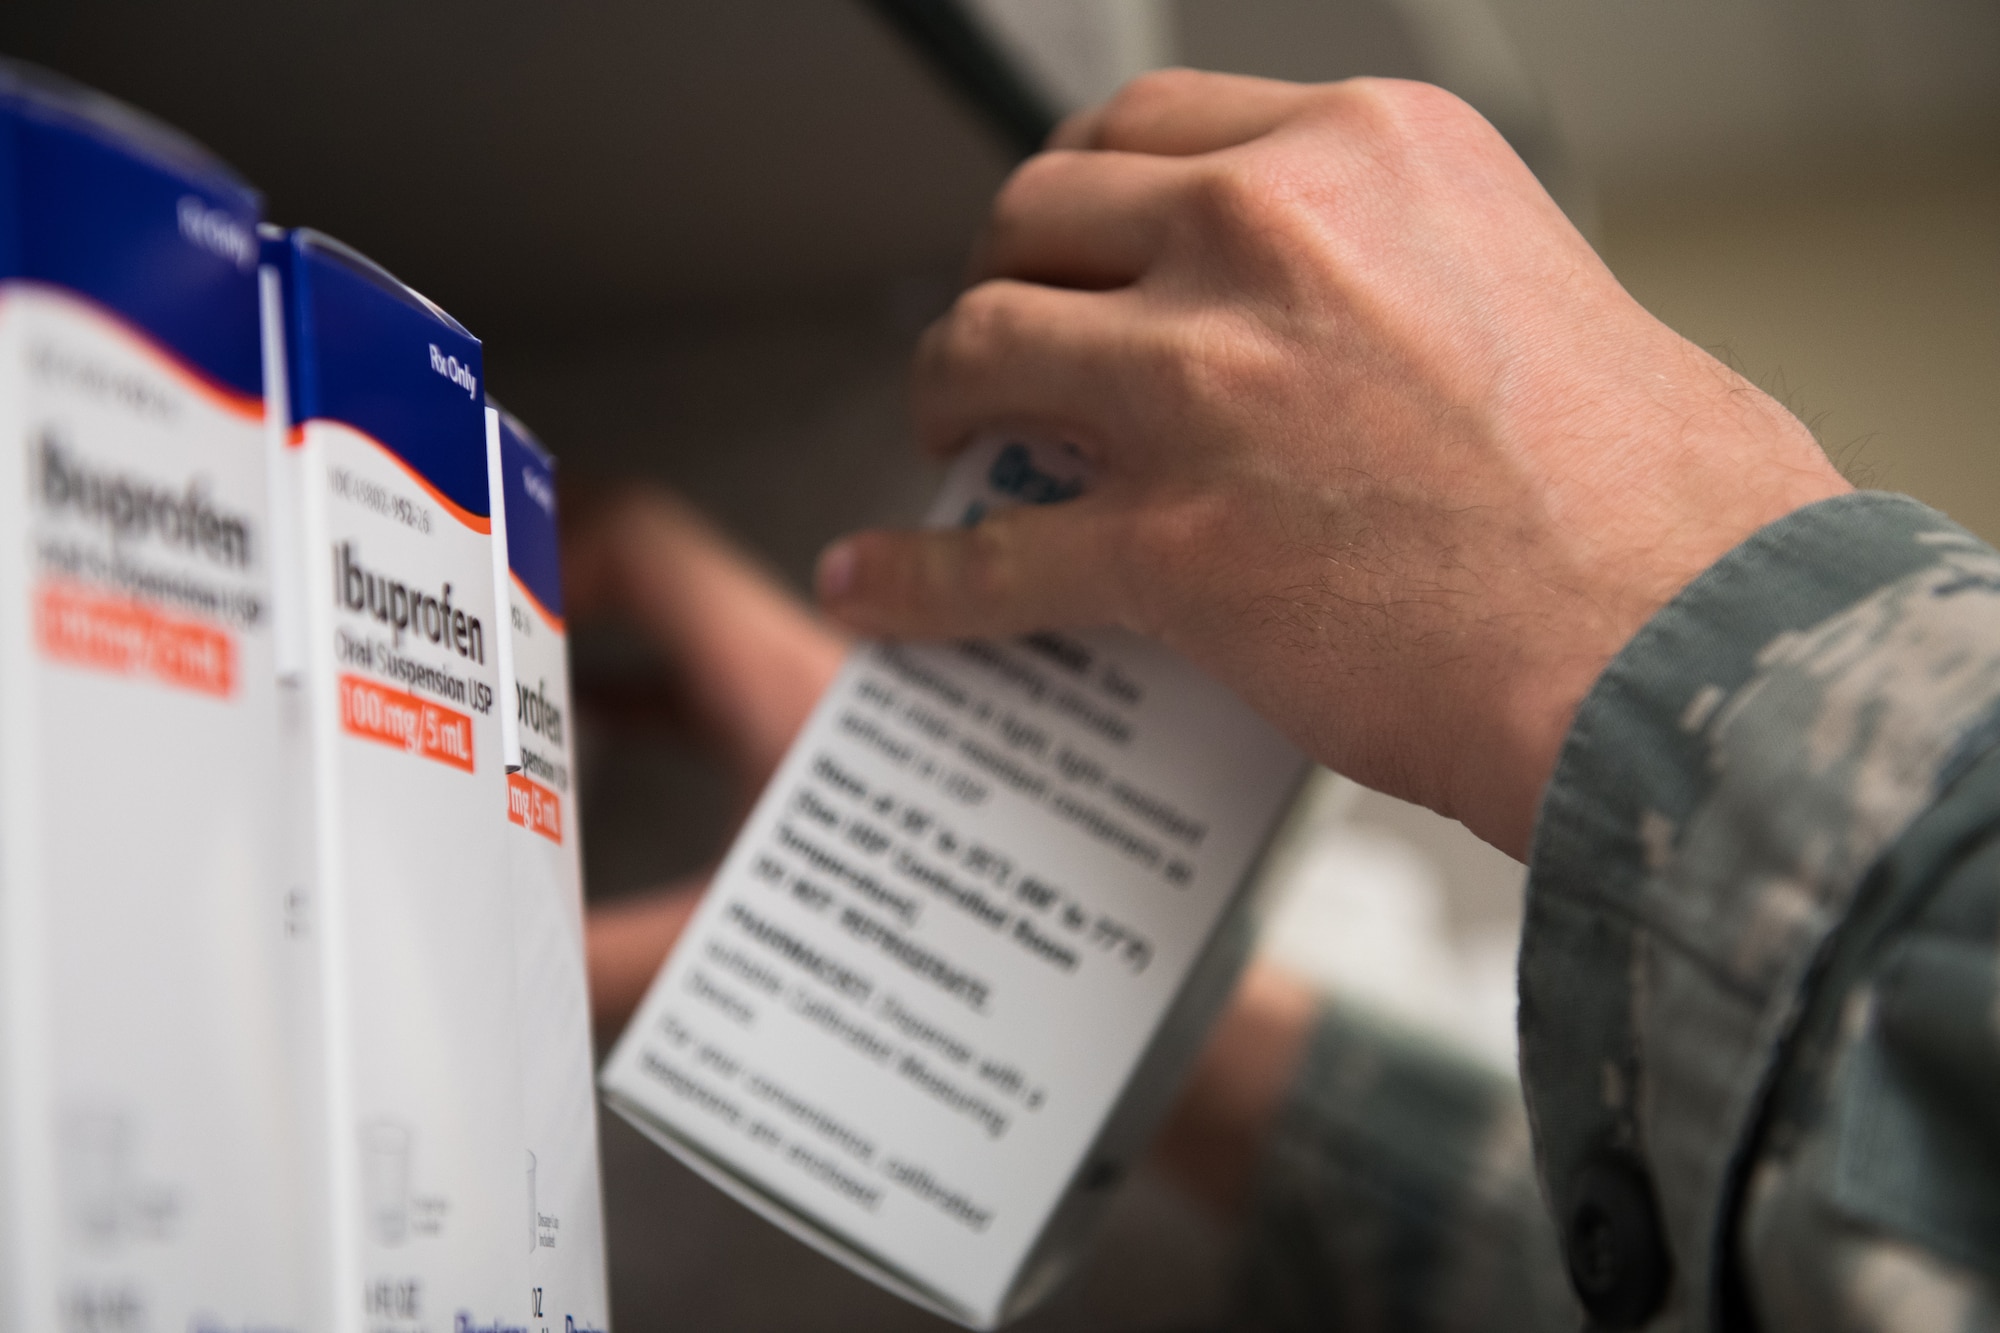 Second Lieutenant Samuel Wozinski, 2nd Medical Group Satellite Pharmacy volunteer, stocks the pharmacy shelves at Barksdale Air Force Base, La., Feb. 5, 2019. Volunteers handle straightforward tasks such as handing out prescriptions to customers and stocking shelves which allows the pharmacy staff more time to safely process prescriptions. (U.S. Air Force photo by Senior Airman Cassandra Johnson)